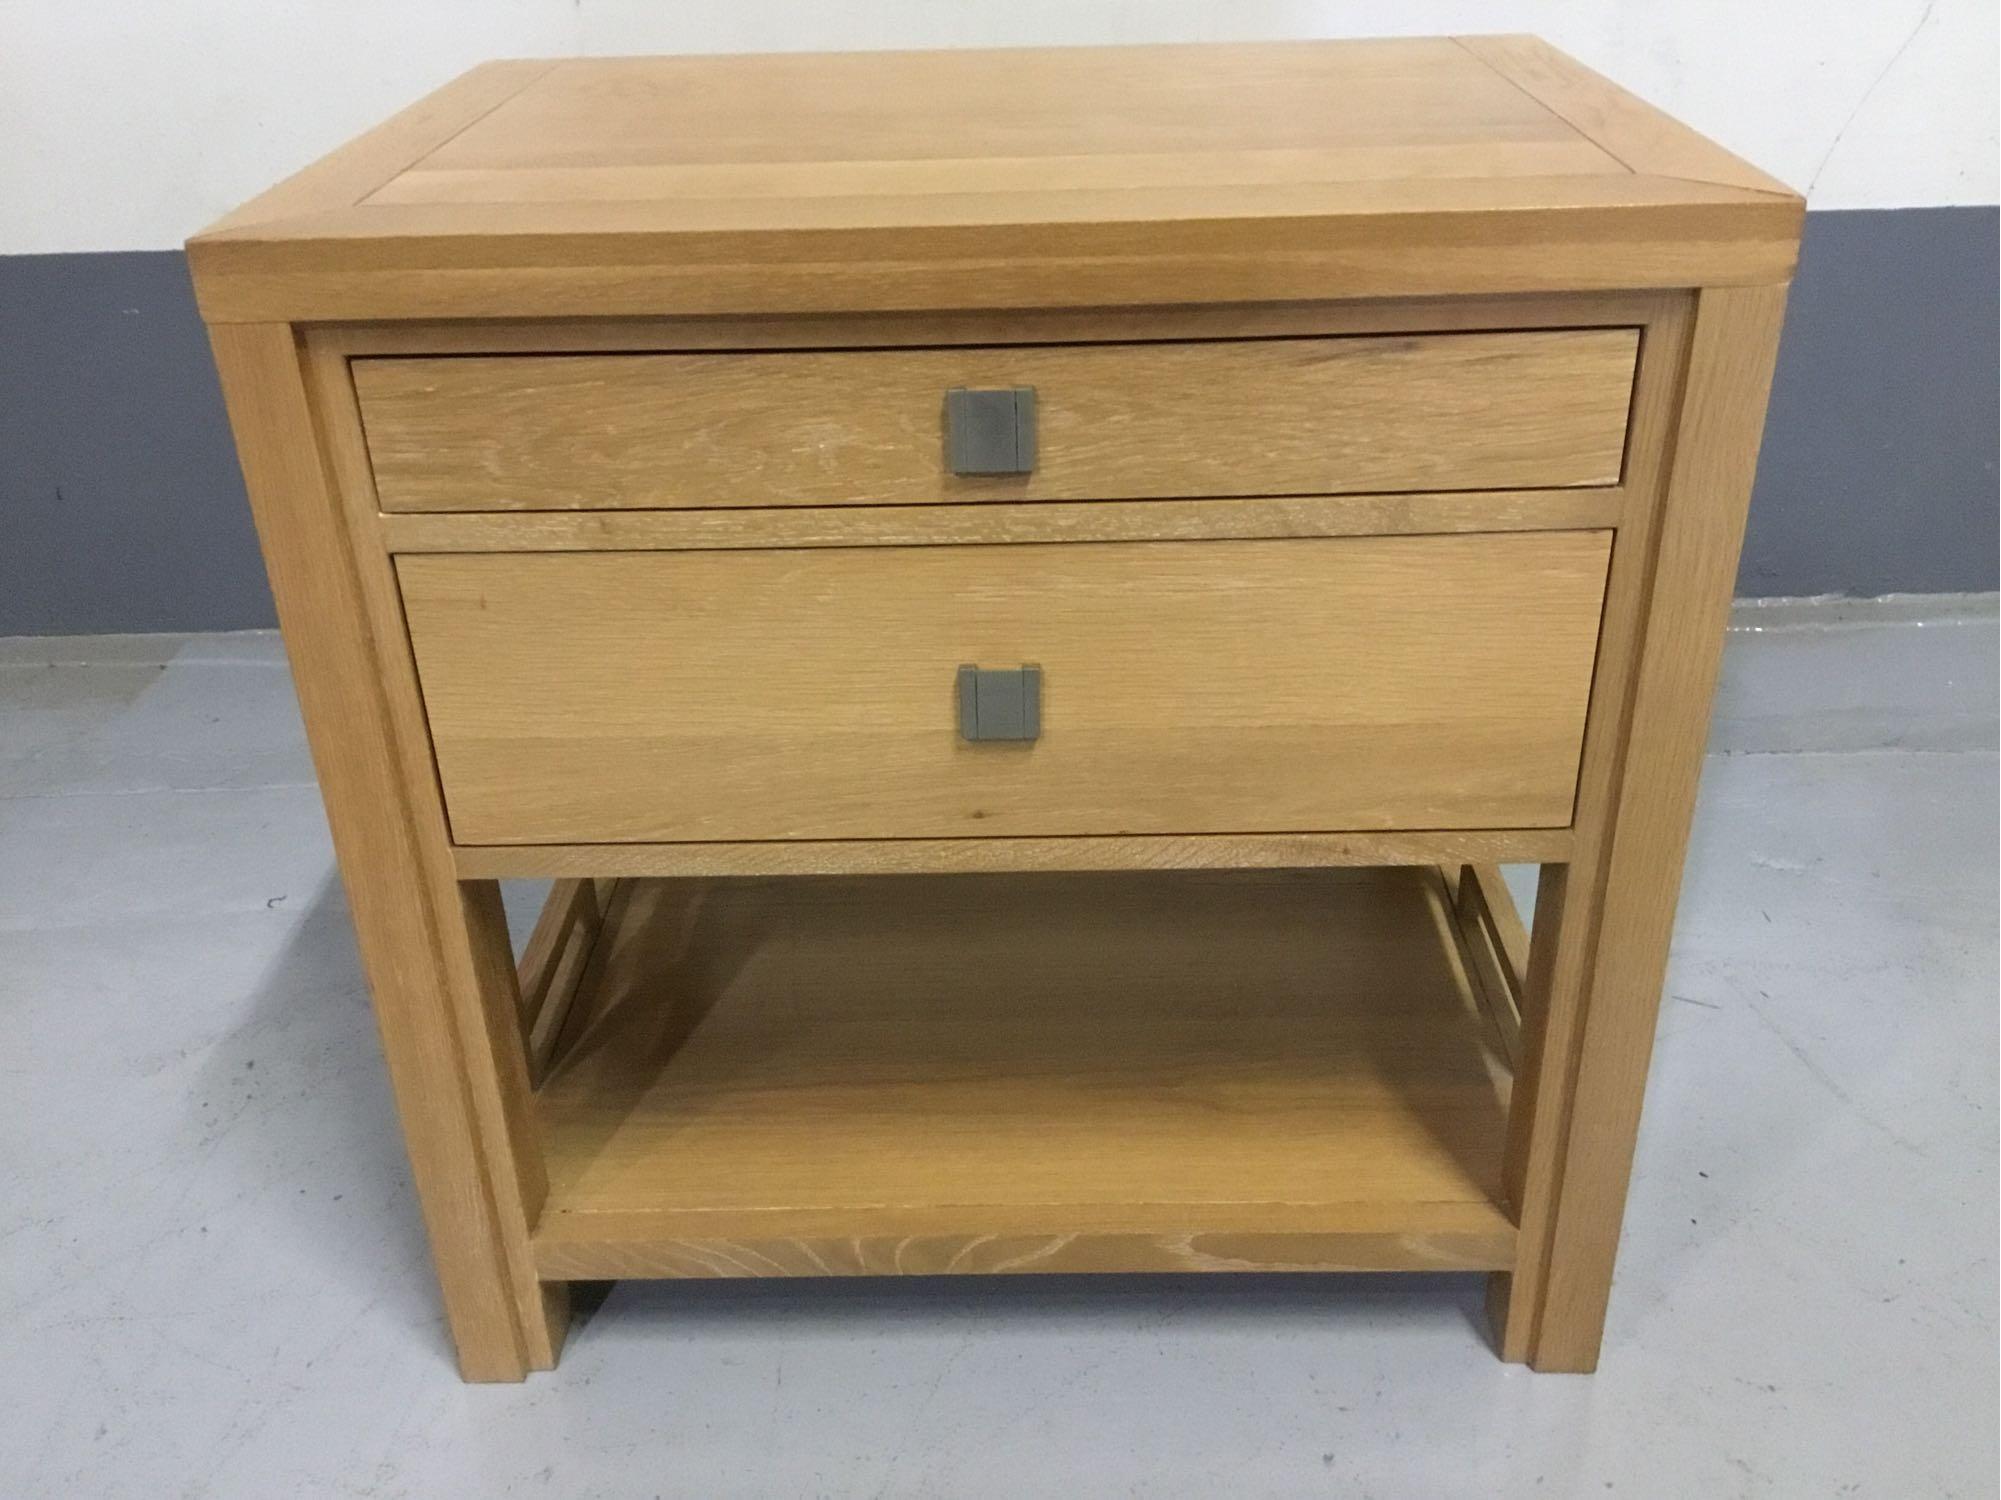 Cambridge Mills 2-Drawer Solid Wooden End Table